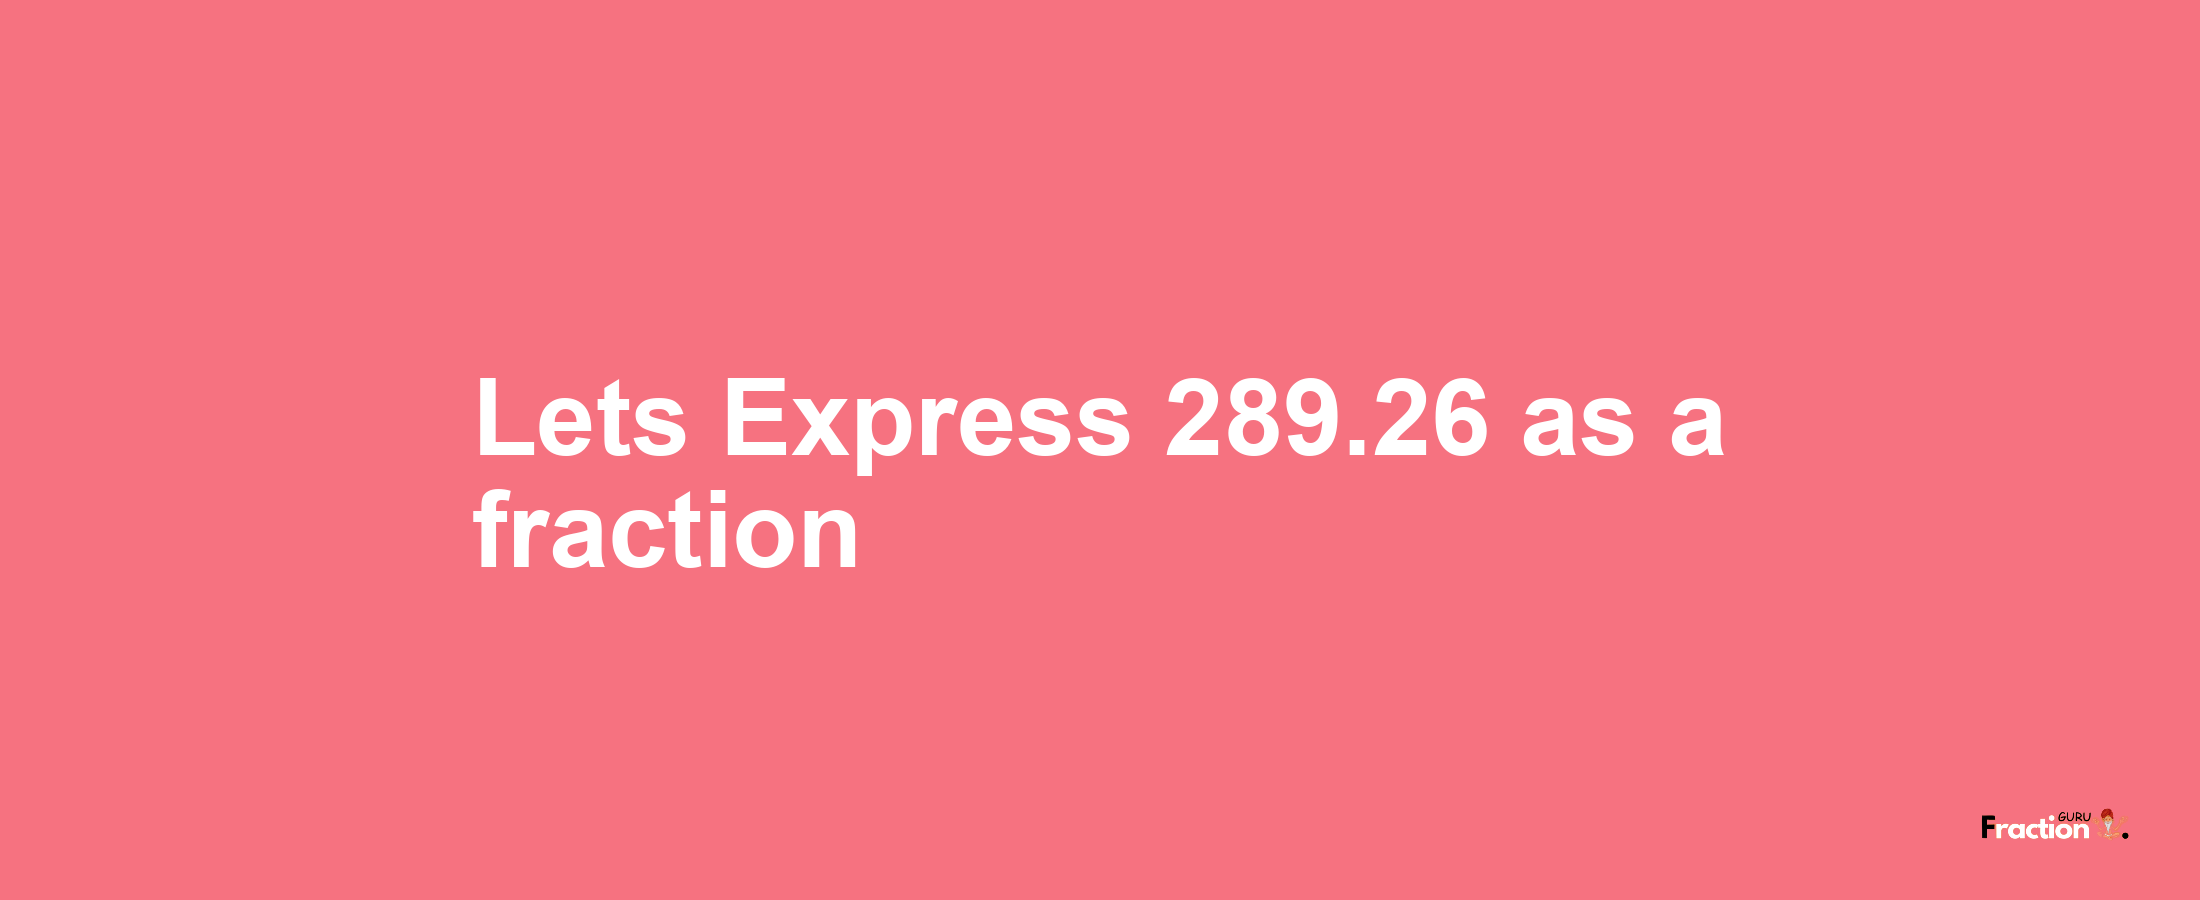 Lets Express 289.26 as afraction